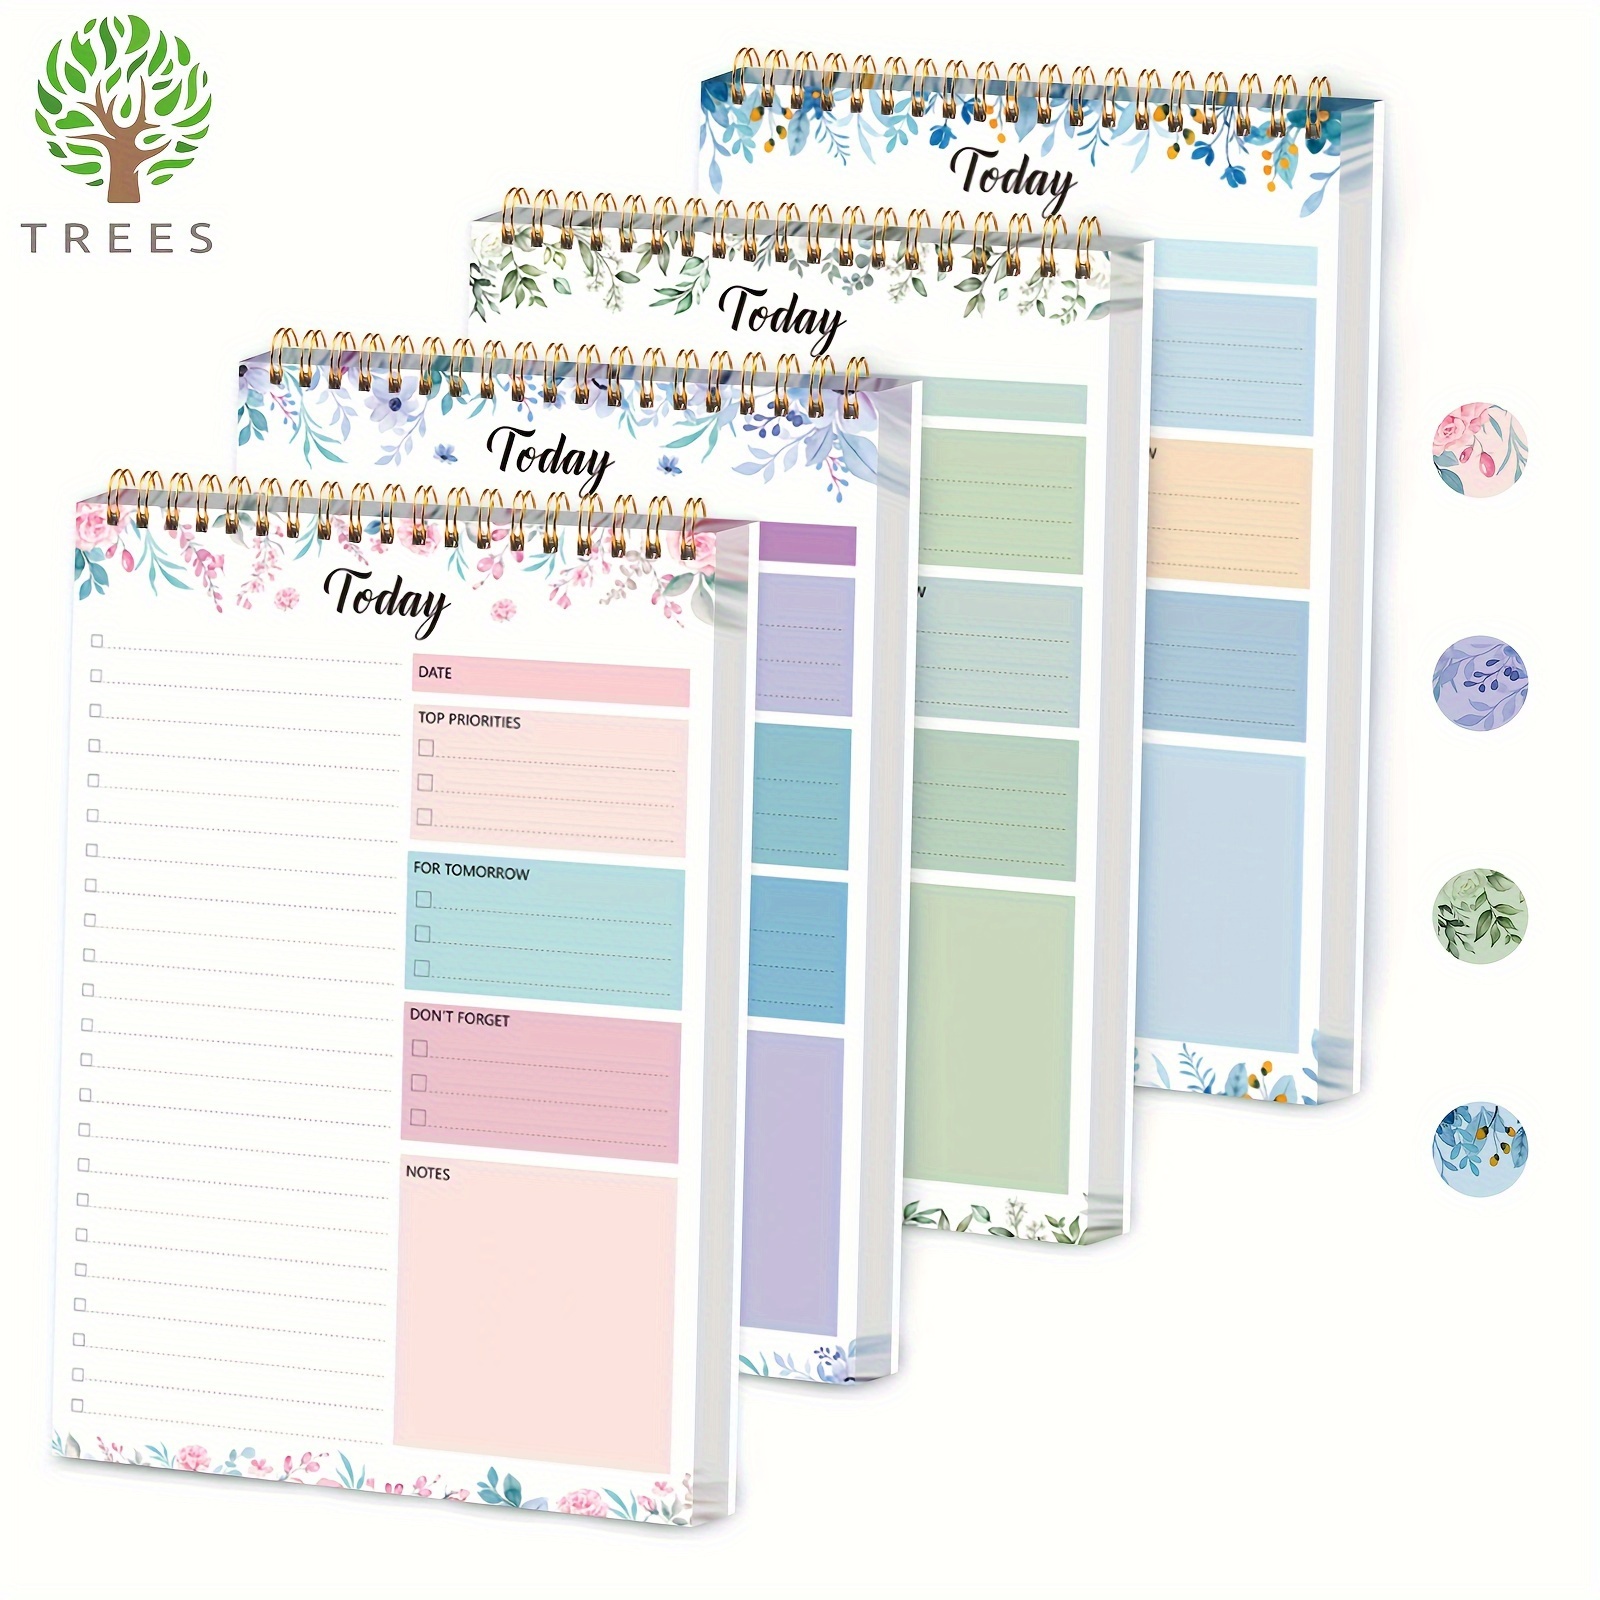 

Trees To Do List Notepad - To Do List Notebook For Work With 52 Sheets, 9.8" X 6.7" Undated Daily Planner With Hourly Schedule For Task Management